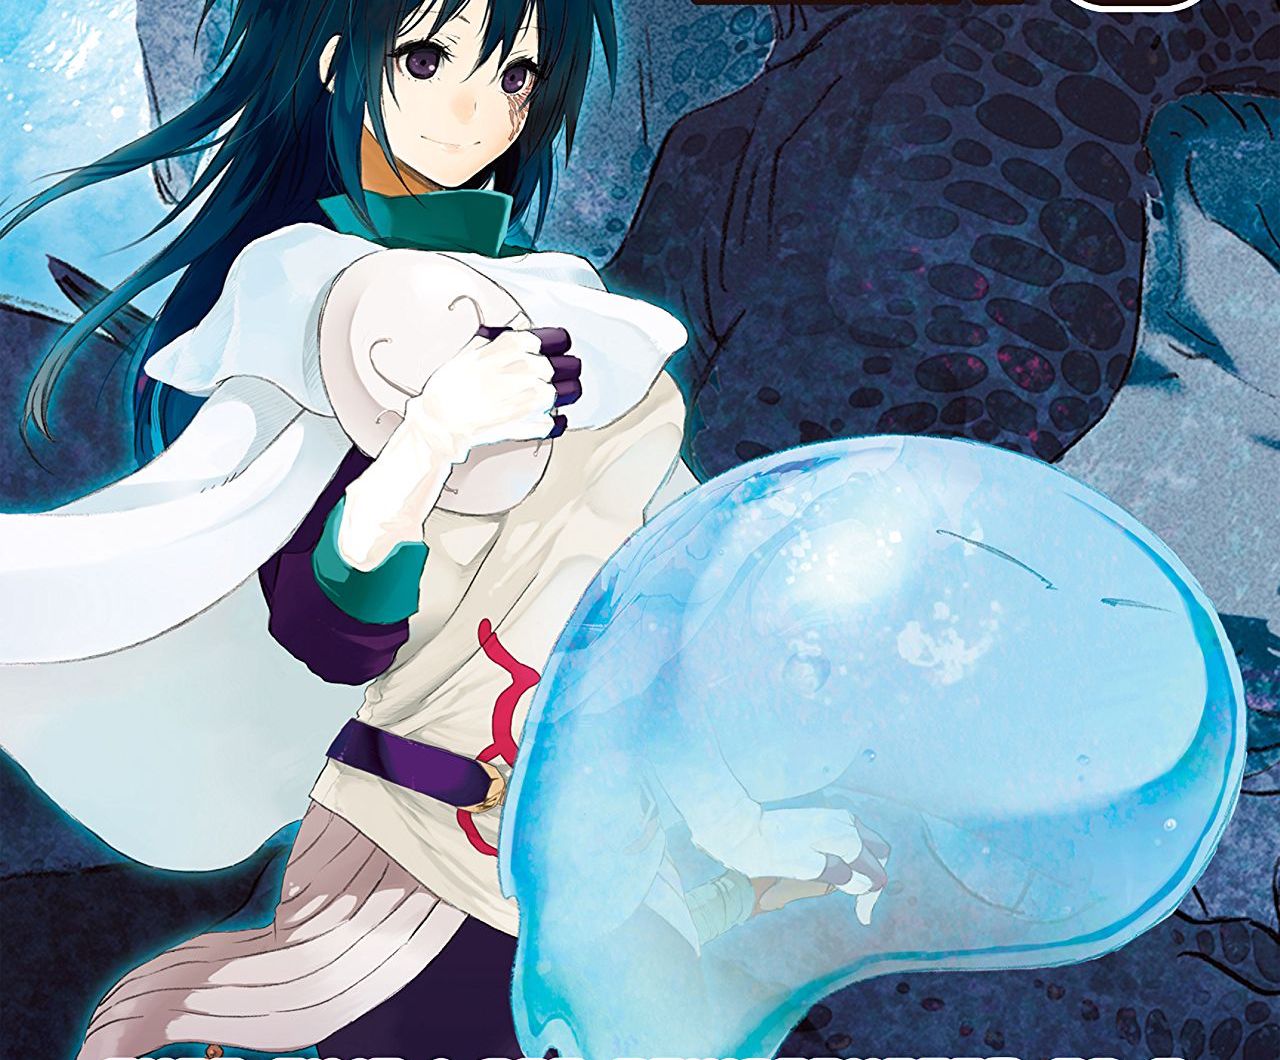 That Time I Got Reincarnated as a Slime Vol. 1 review. 